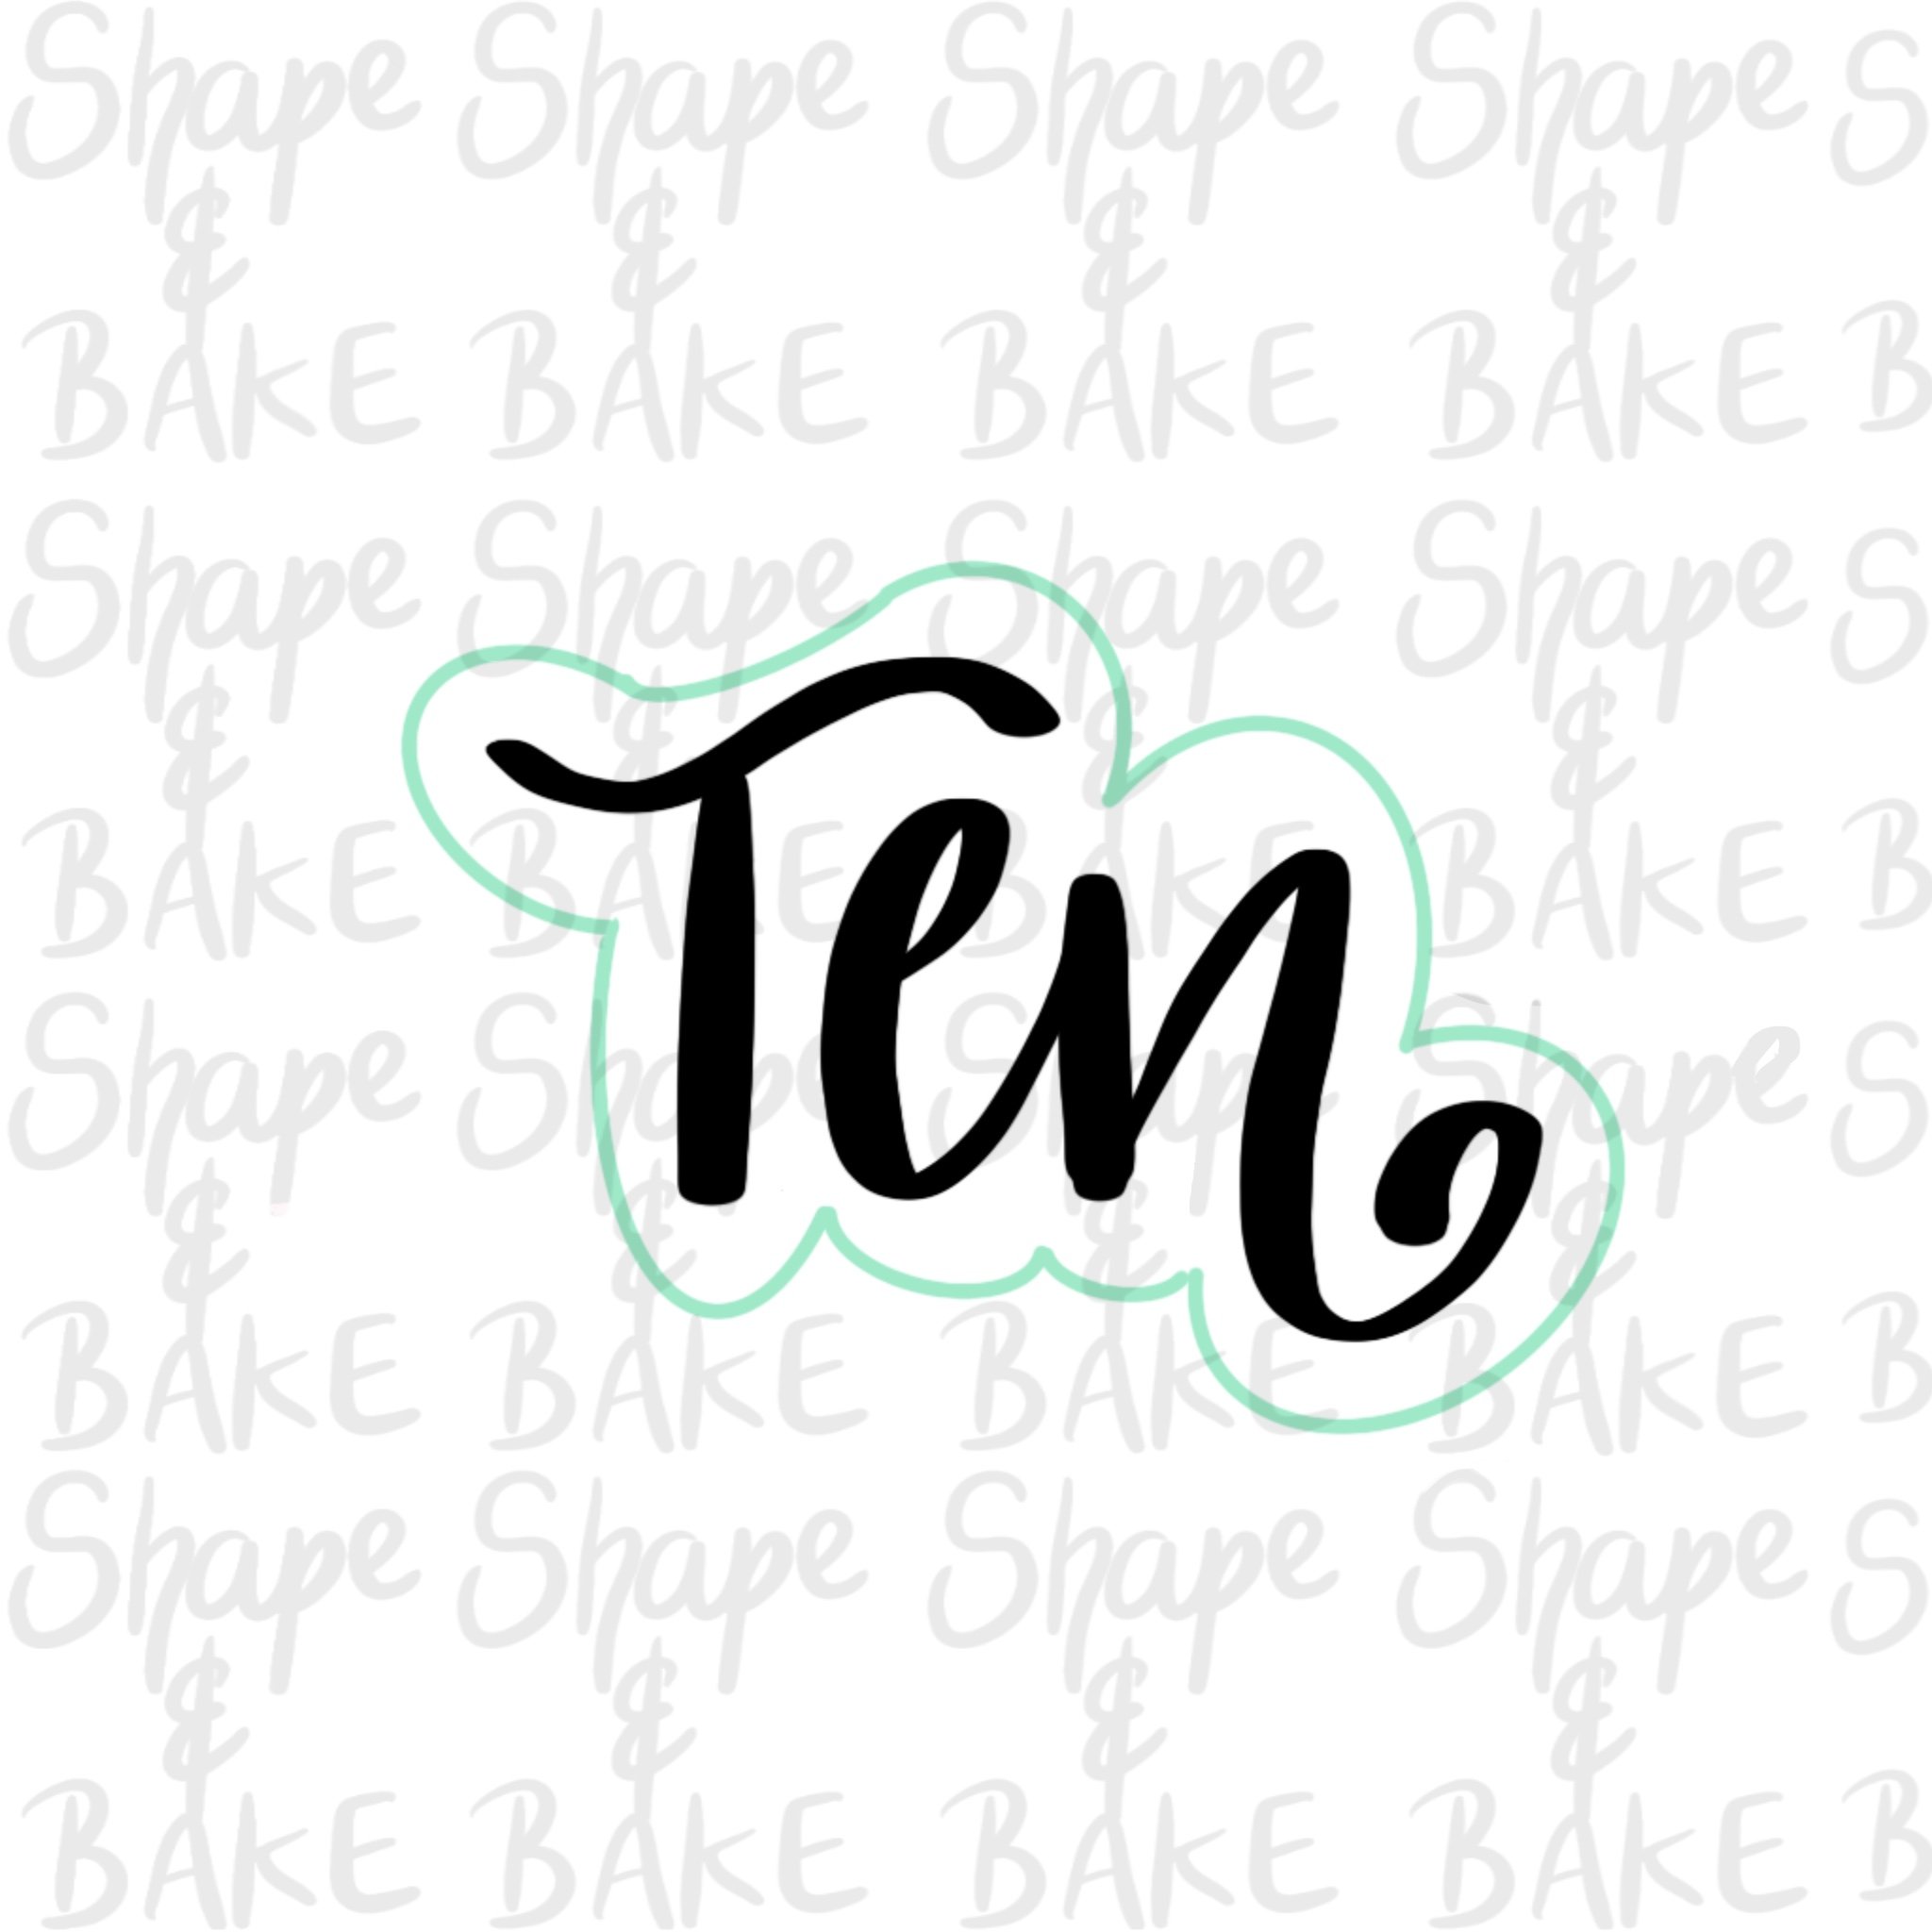 number-ten-word-cookie-cutter-shape-and-bake